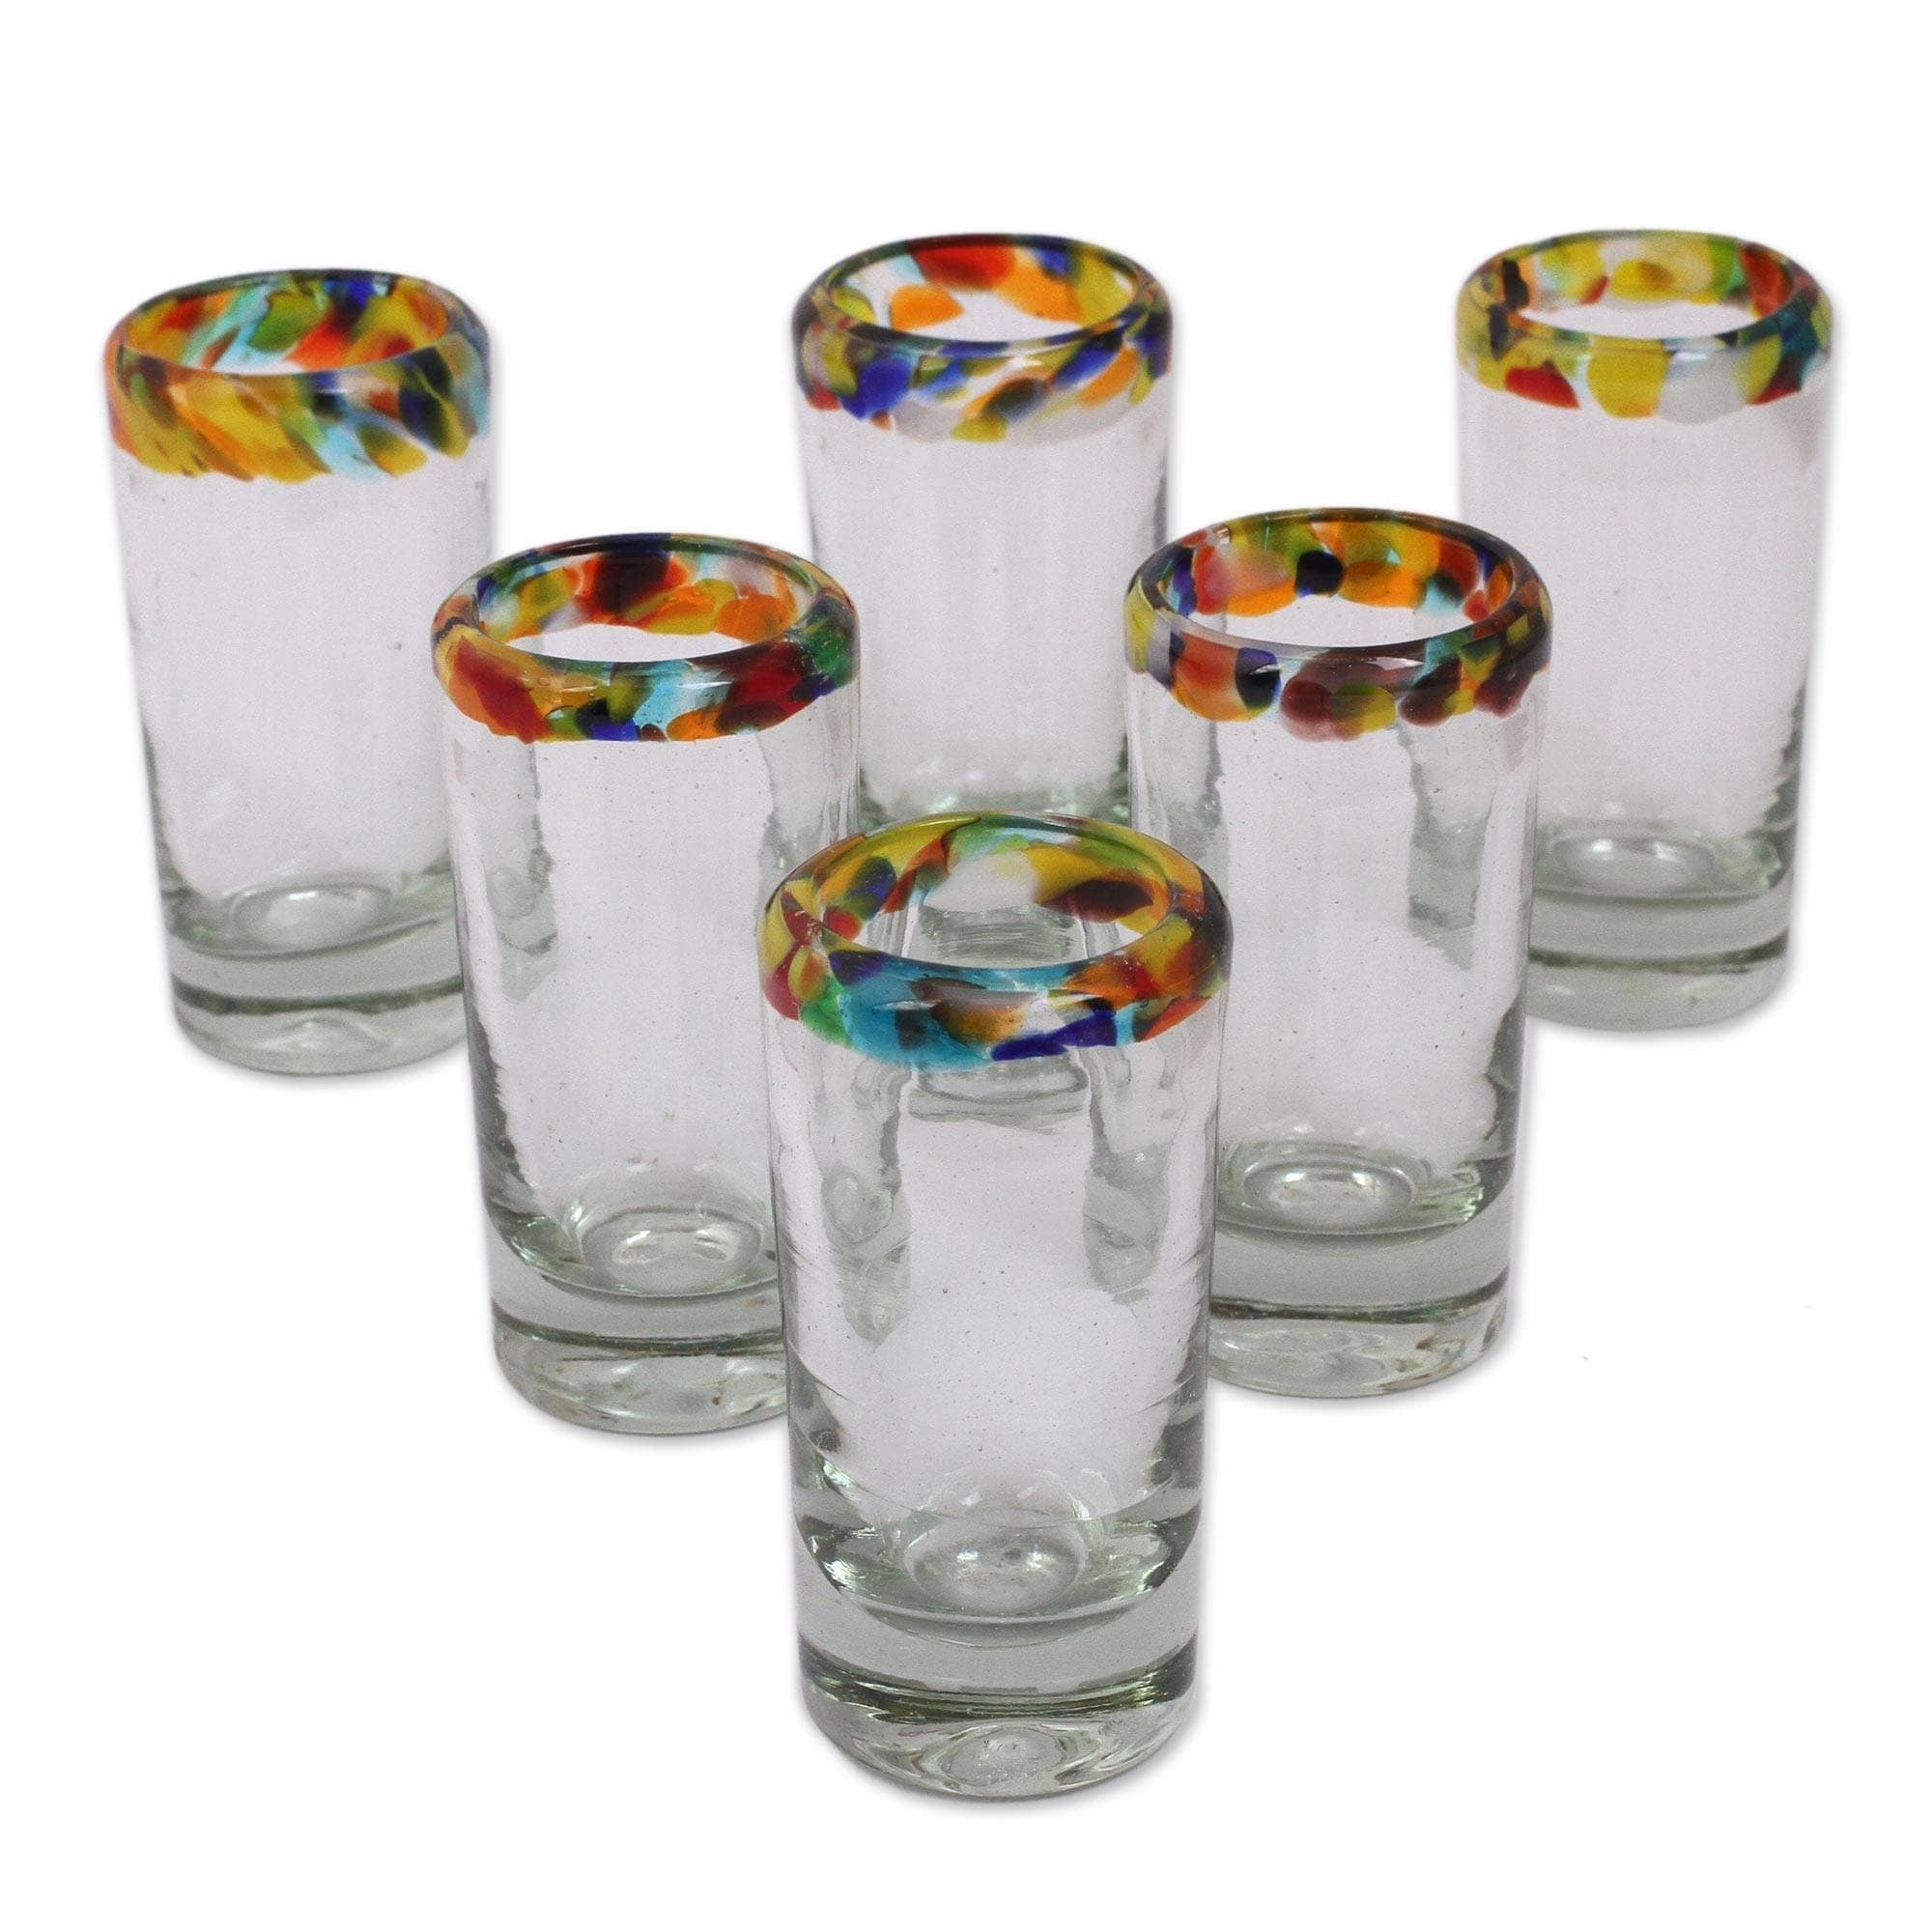 https://ak1.ostkcdn.com/images/products/is/images/direct/24c121529bc80ed6eac95e1c48c6cb77100e6169/Handmade-Blown-Glass-Confetti-Tequila-Shot-Glasses-Set-of-6-%28Mexico%29.jpg